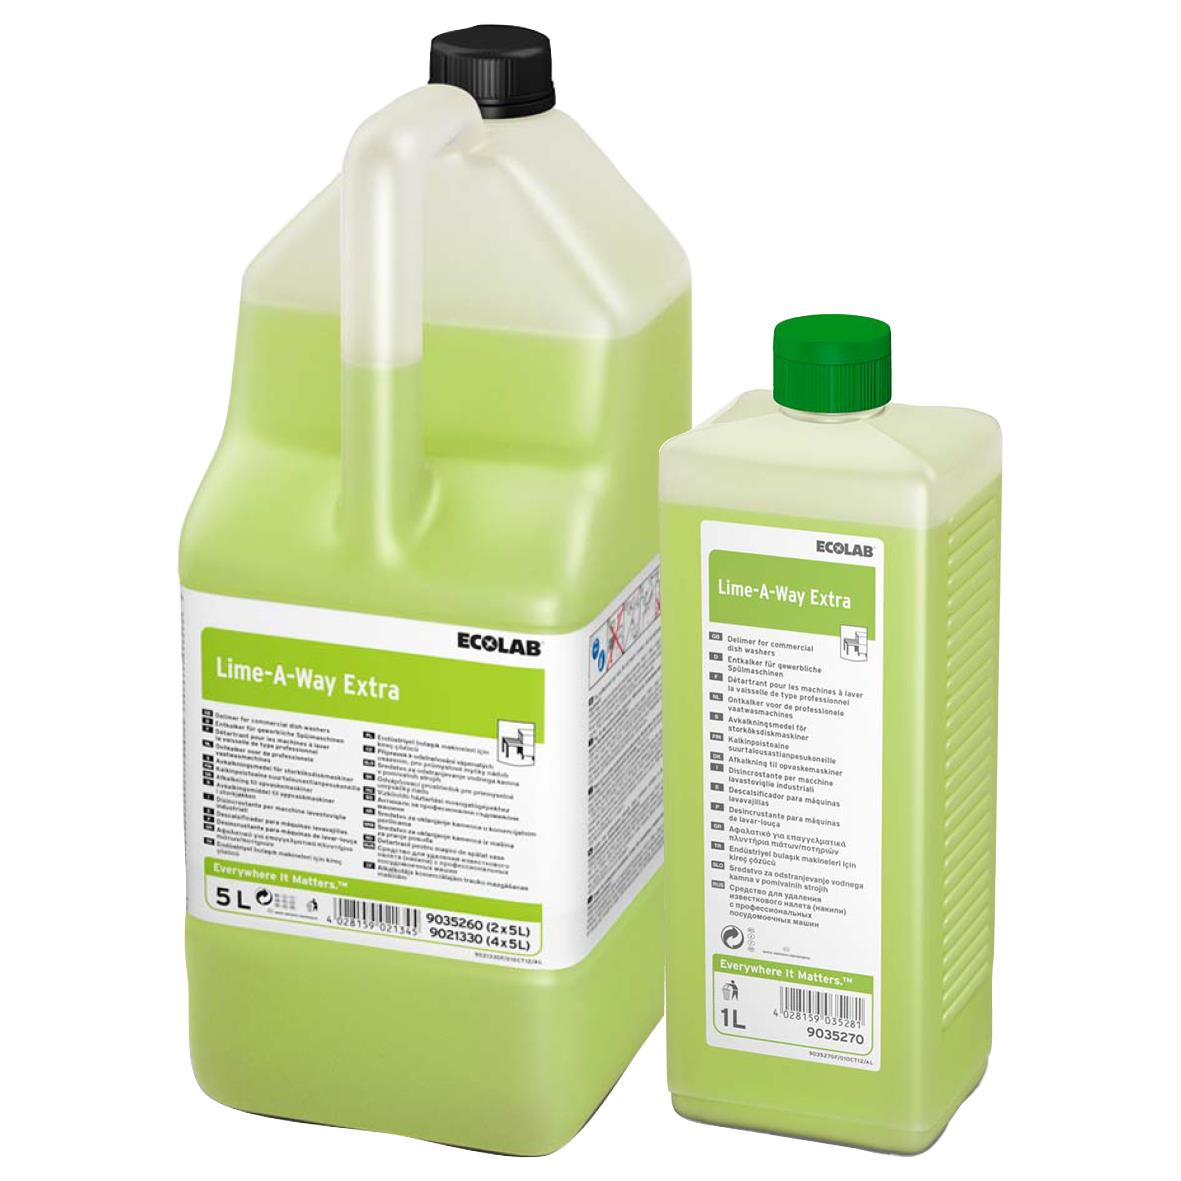 Avkalkningsmedel Ecolab Lime-A-Way Extra 1L 52050028_2